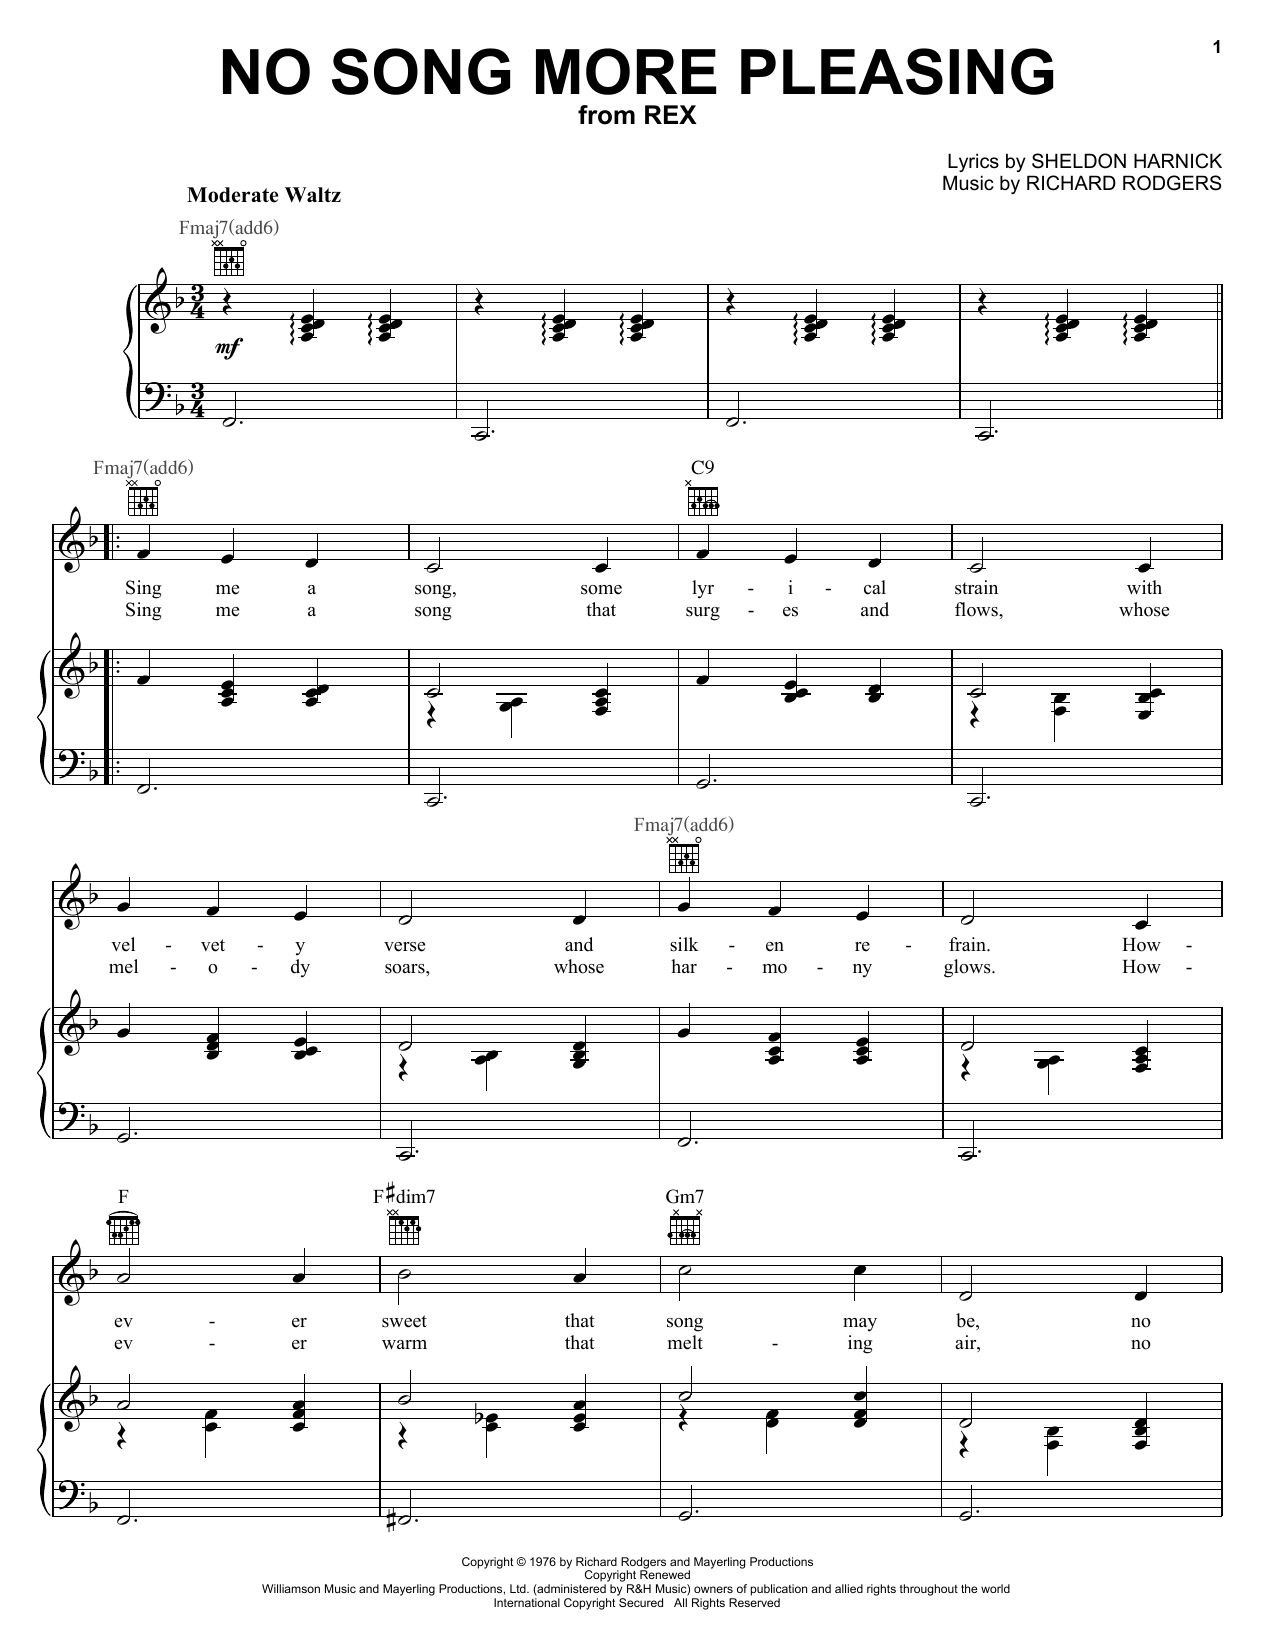 Download Richard Rodgers No Song More Pleasing Sheet Music